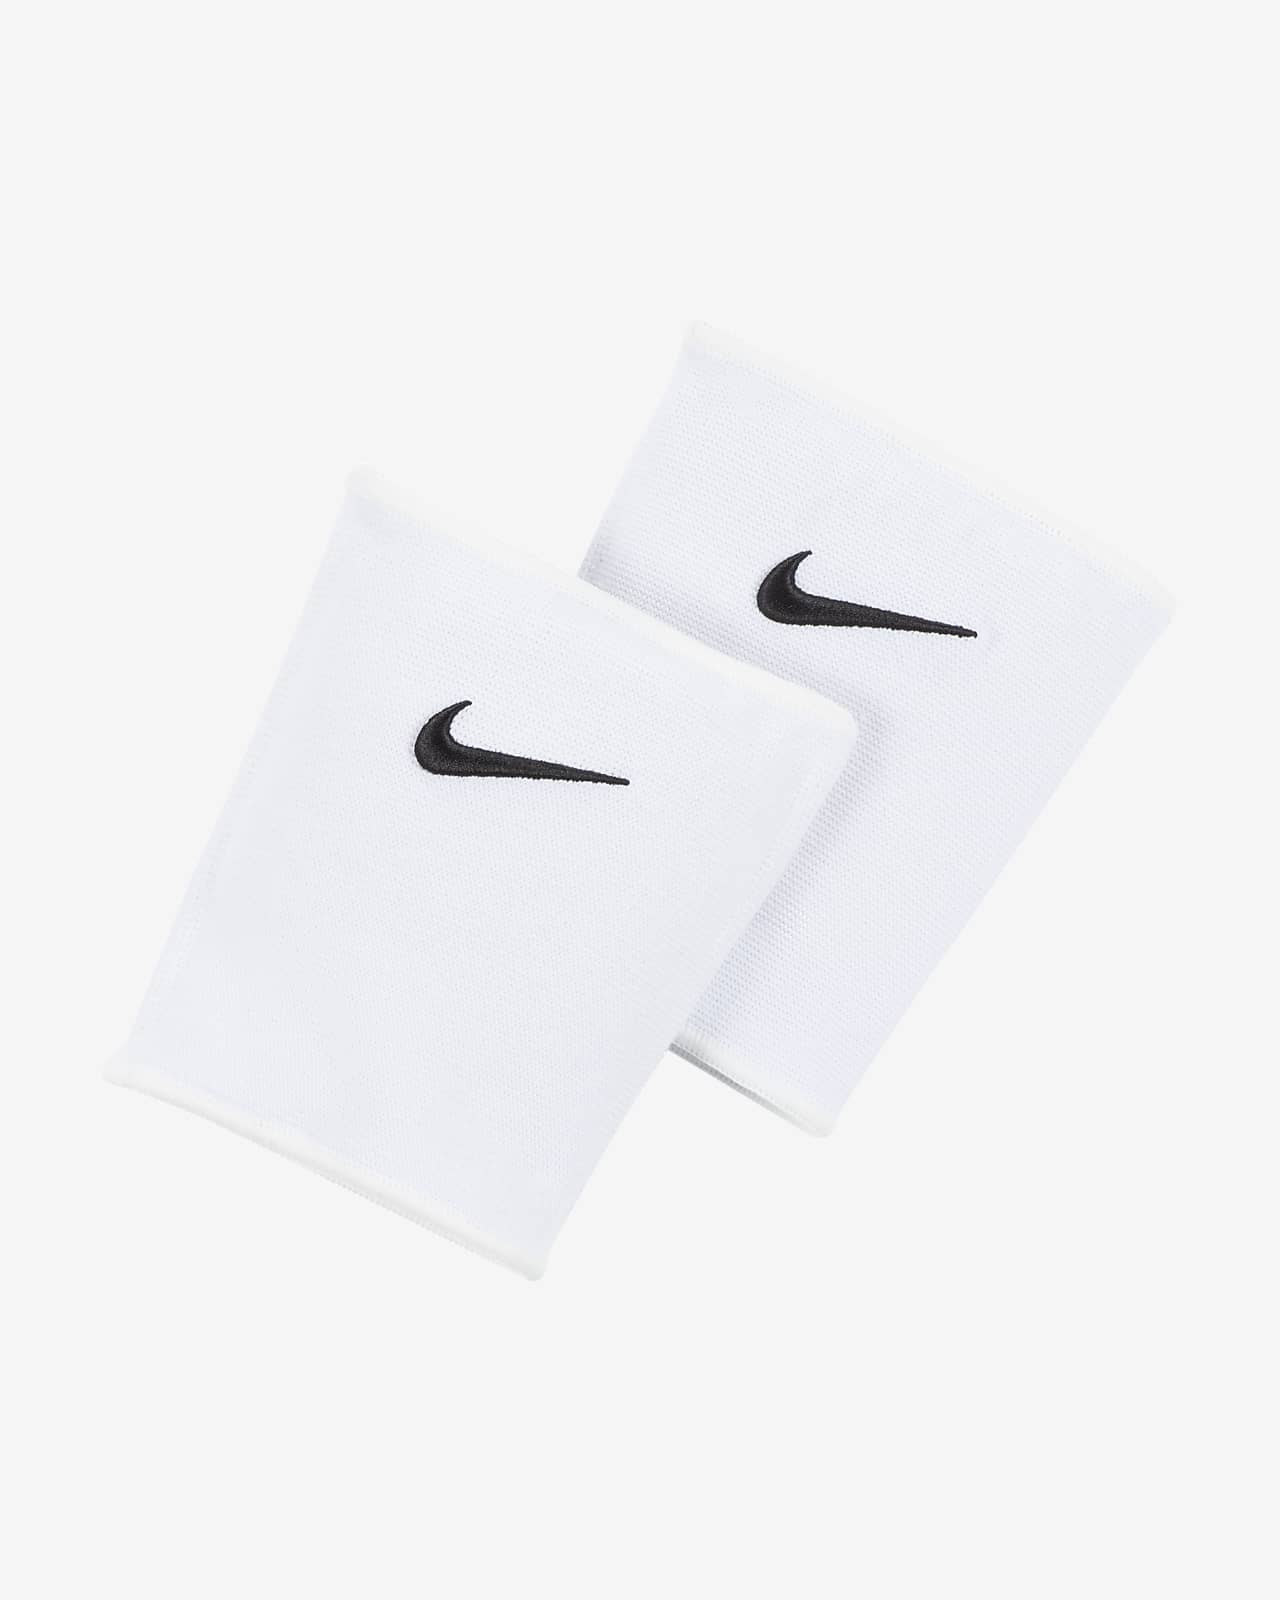 Nike Dri-FIT Essential Volleyball Knee Pads